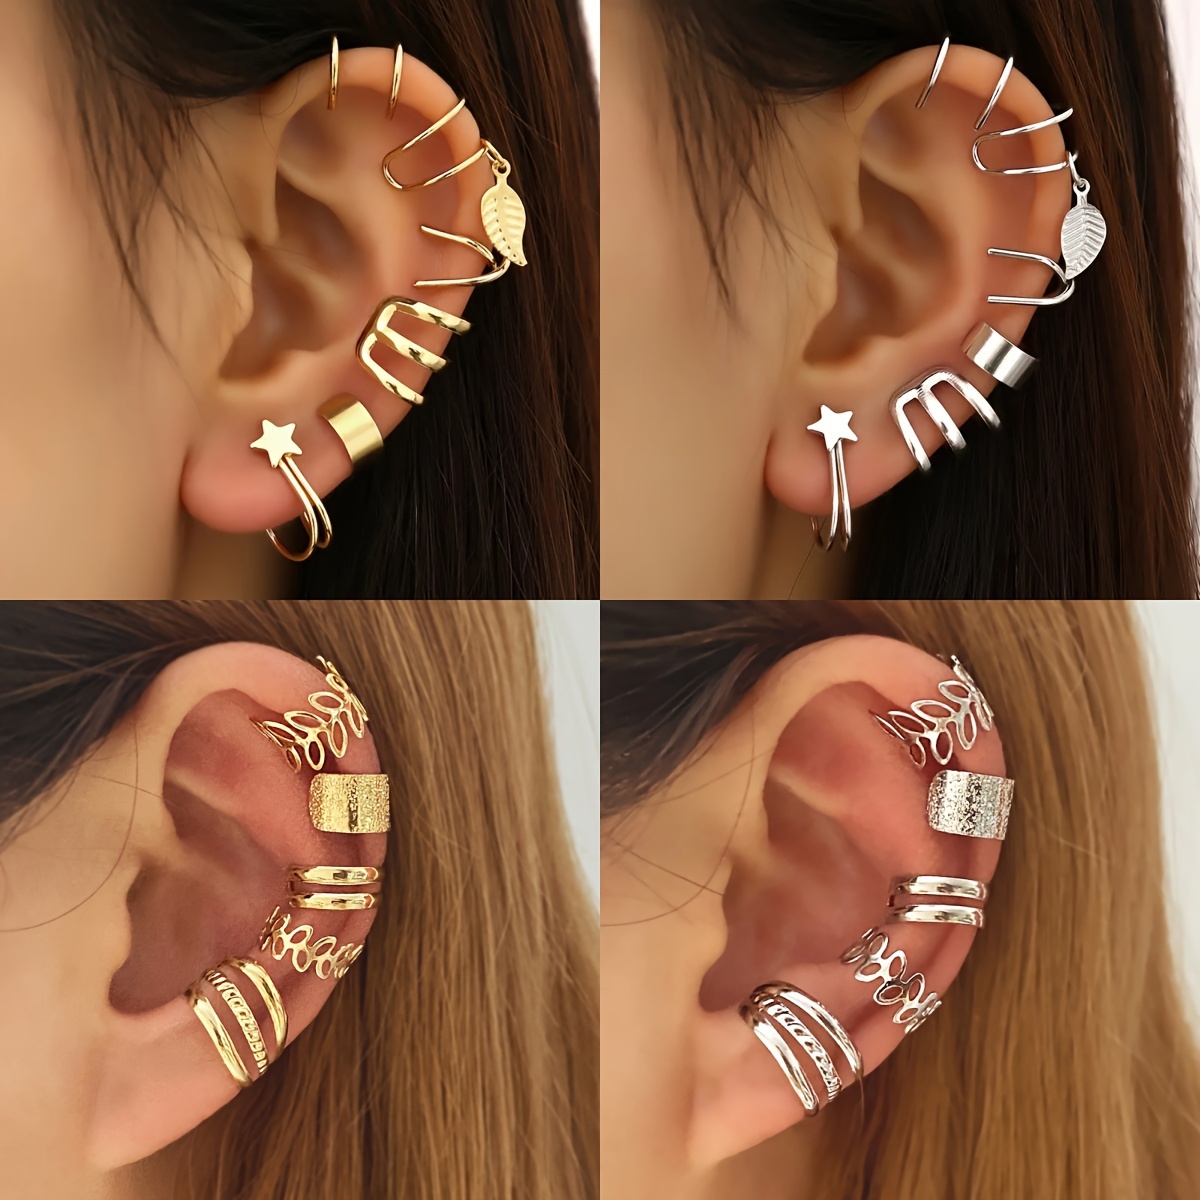 

22-piece Elegant Clip-on Cartilage Earrings Set For Women - Adjustable, No Piercing Required, Zinc Alloy Jewelry Gift For Everyday & Party Wear